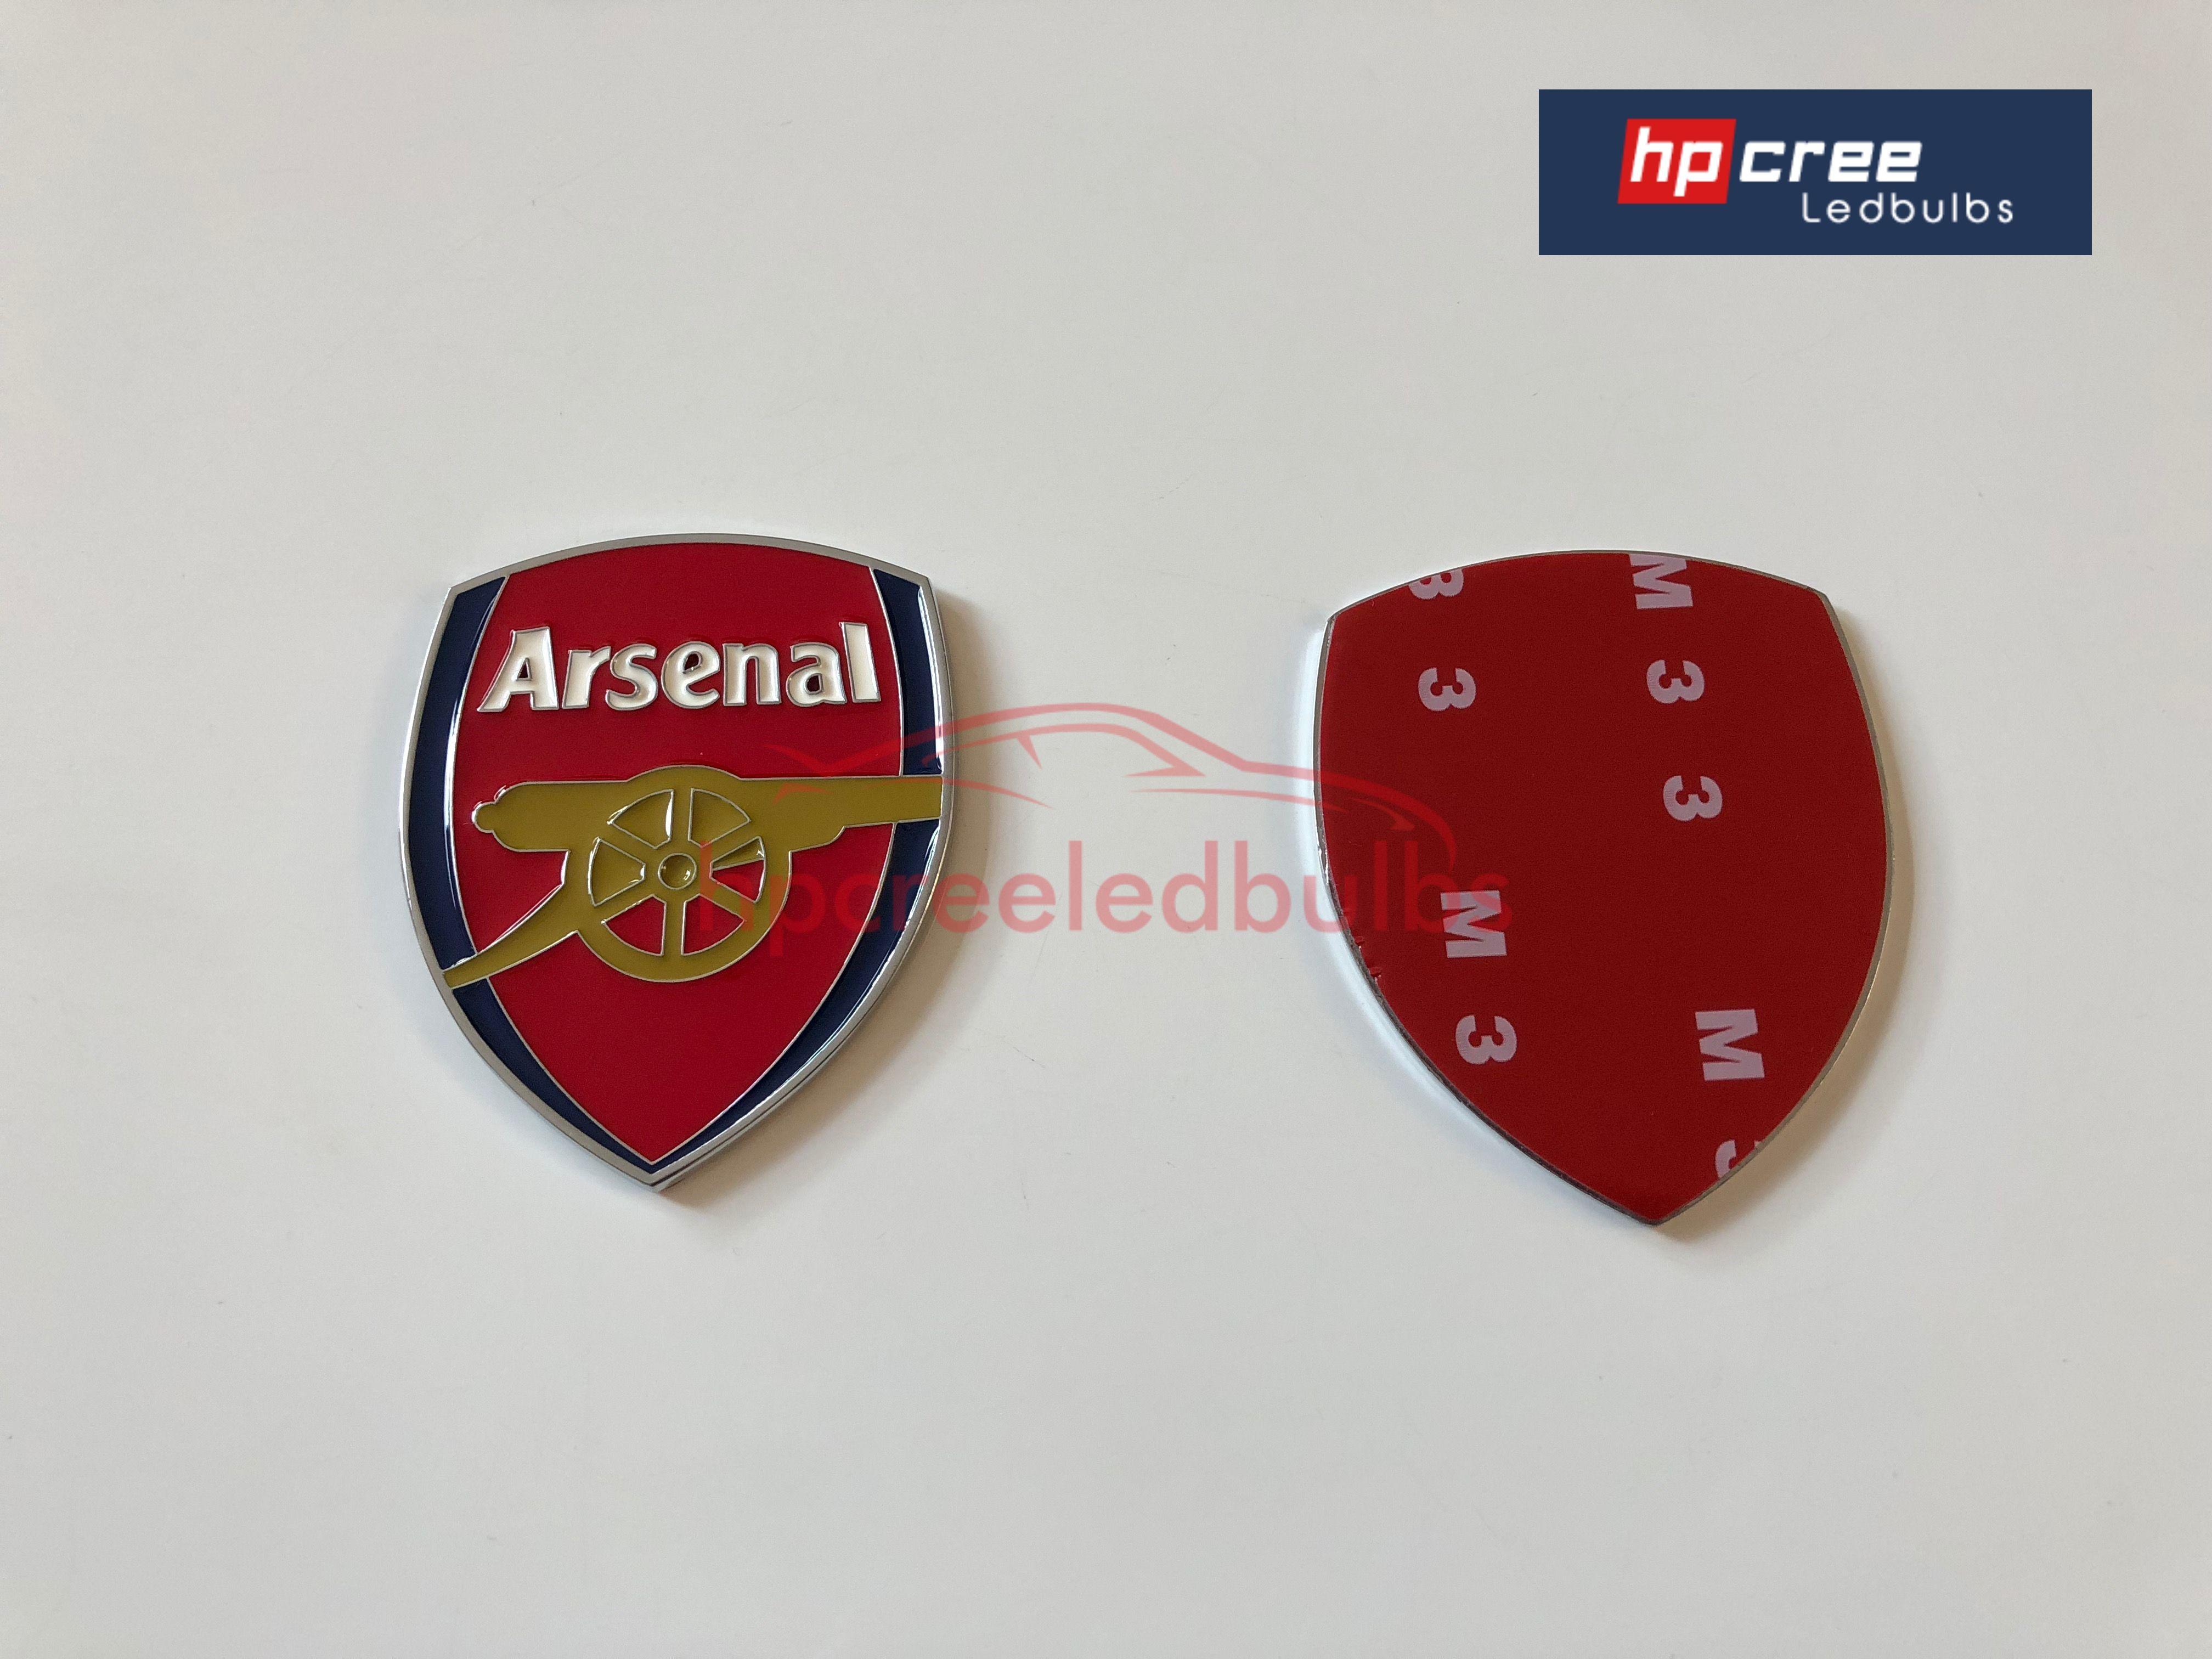 Gray 2018 Logo - NEW 2018 ARSENAL FC 3D METAL LOGO BADGE STICKER CAR STYLING AND